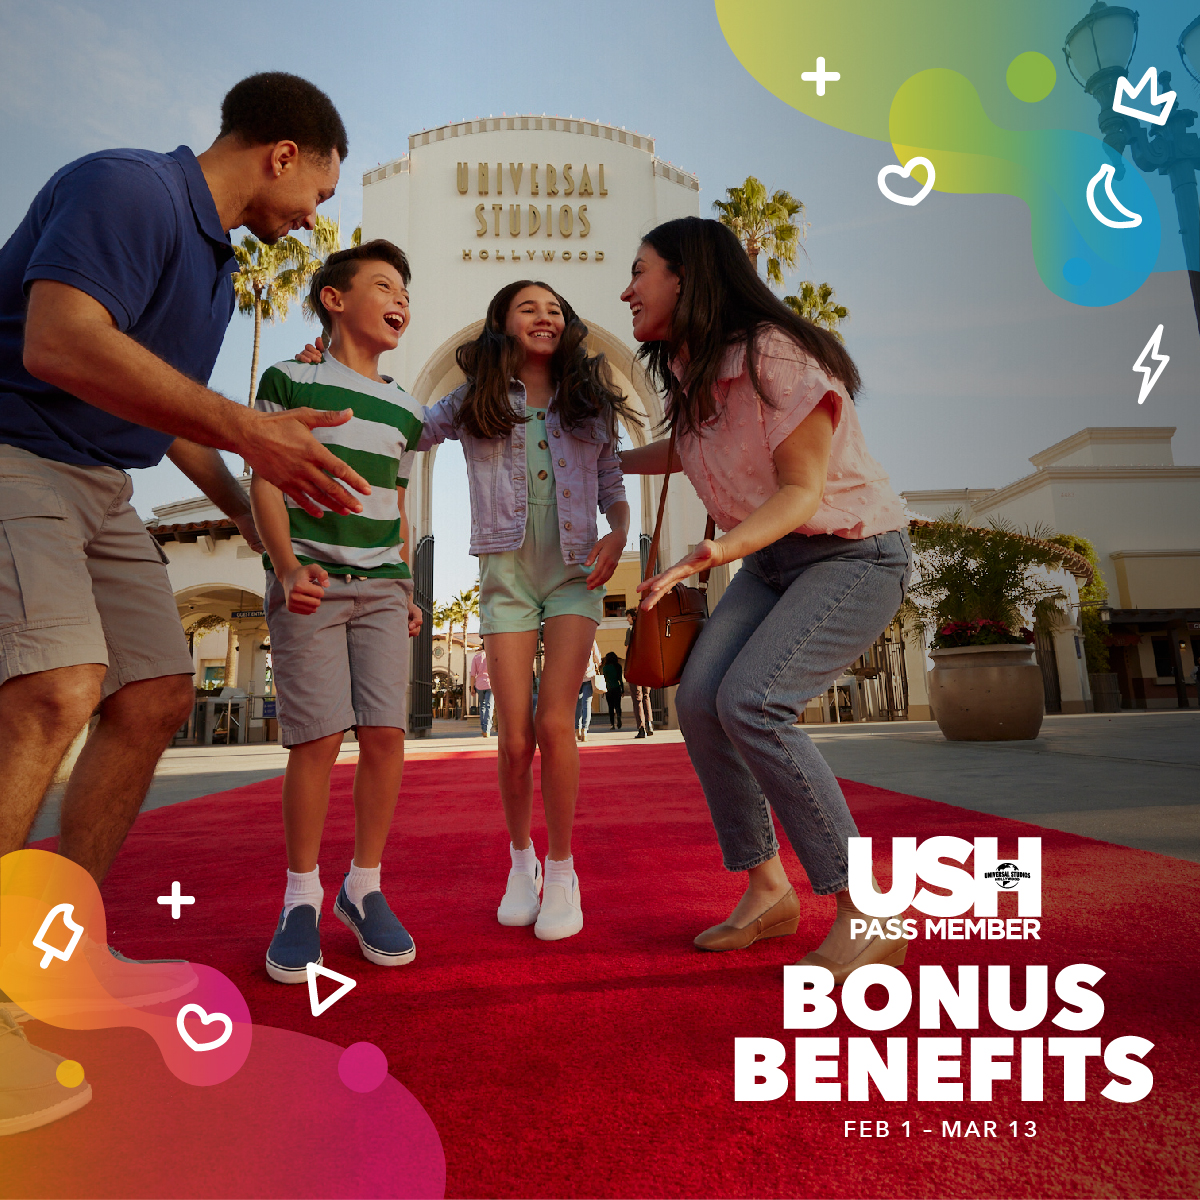 Attention Pass Members! You’ll love these special offers on food and drink, discounts on merch, and fun freebies available in the Park and on CityWalk from Feb 1 – March 13. Check the Bonus Benefits page for full offer details: spr.ly/6014riPbI